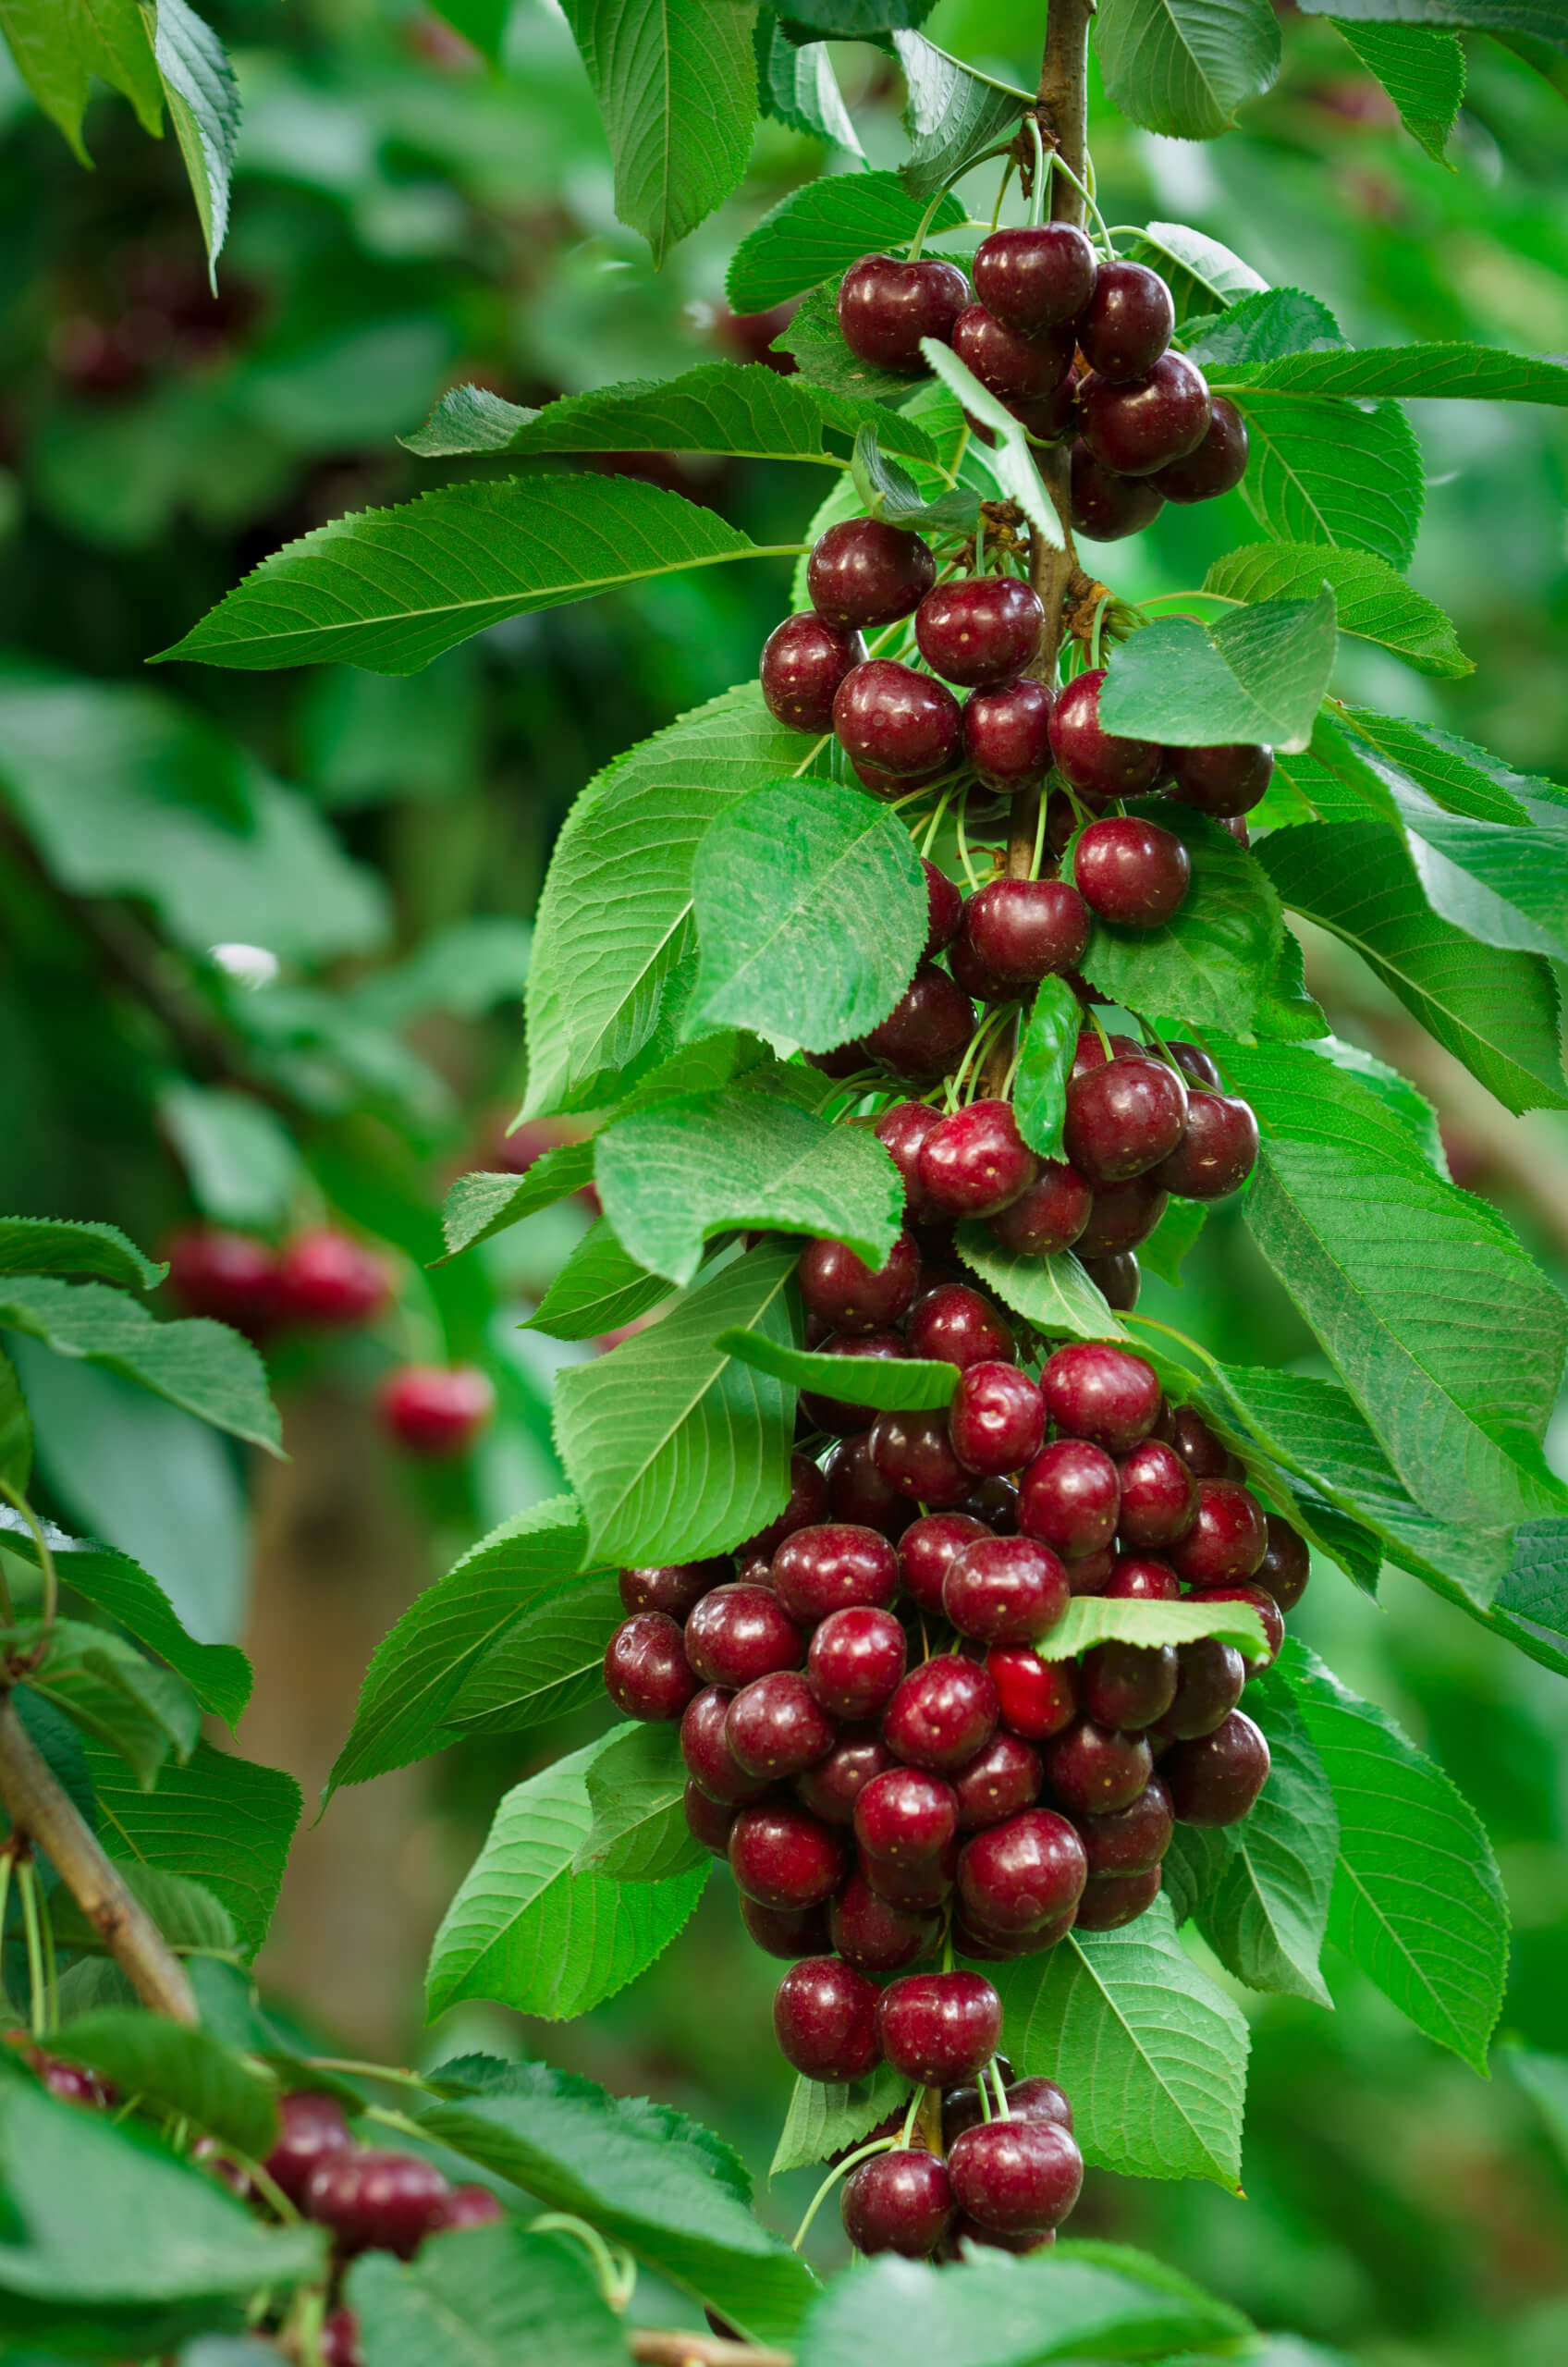 Types of cherries: dark sweet cherries on a branch with green leaves